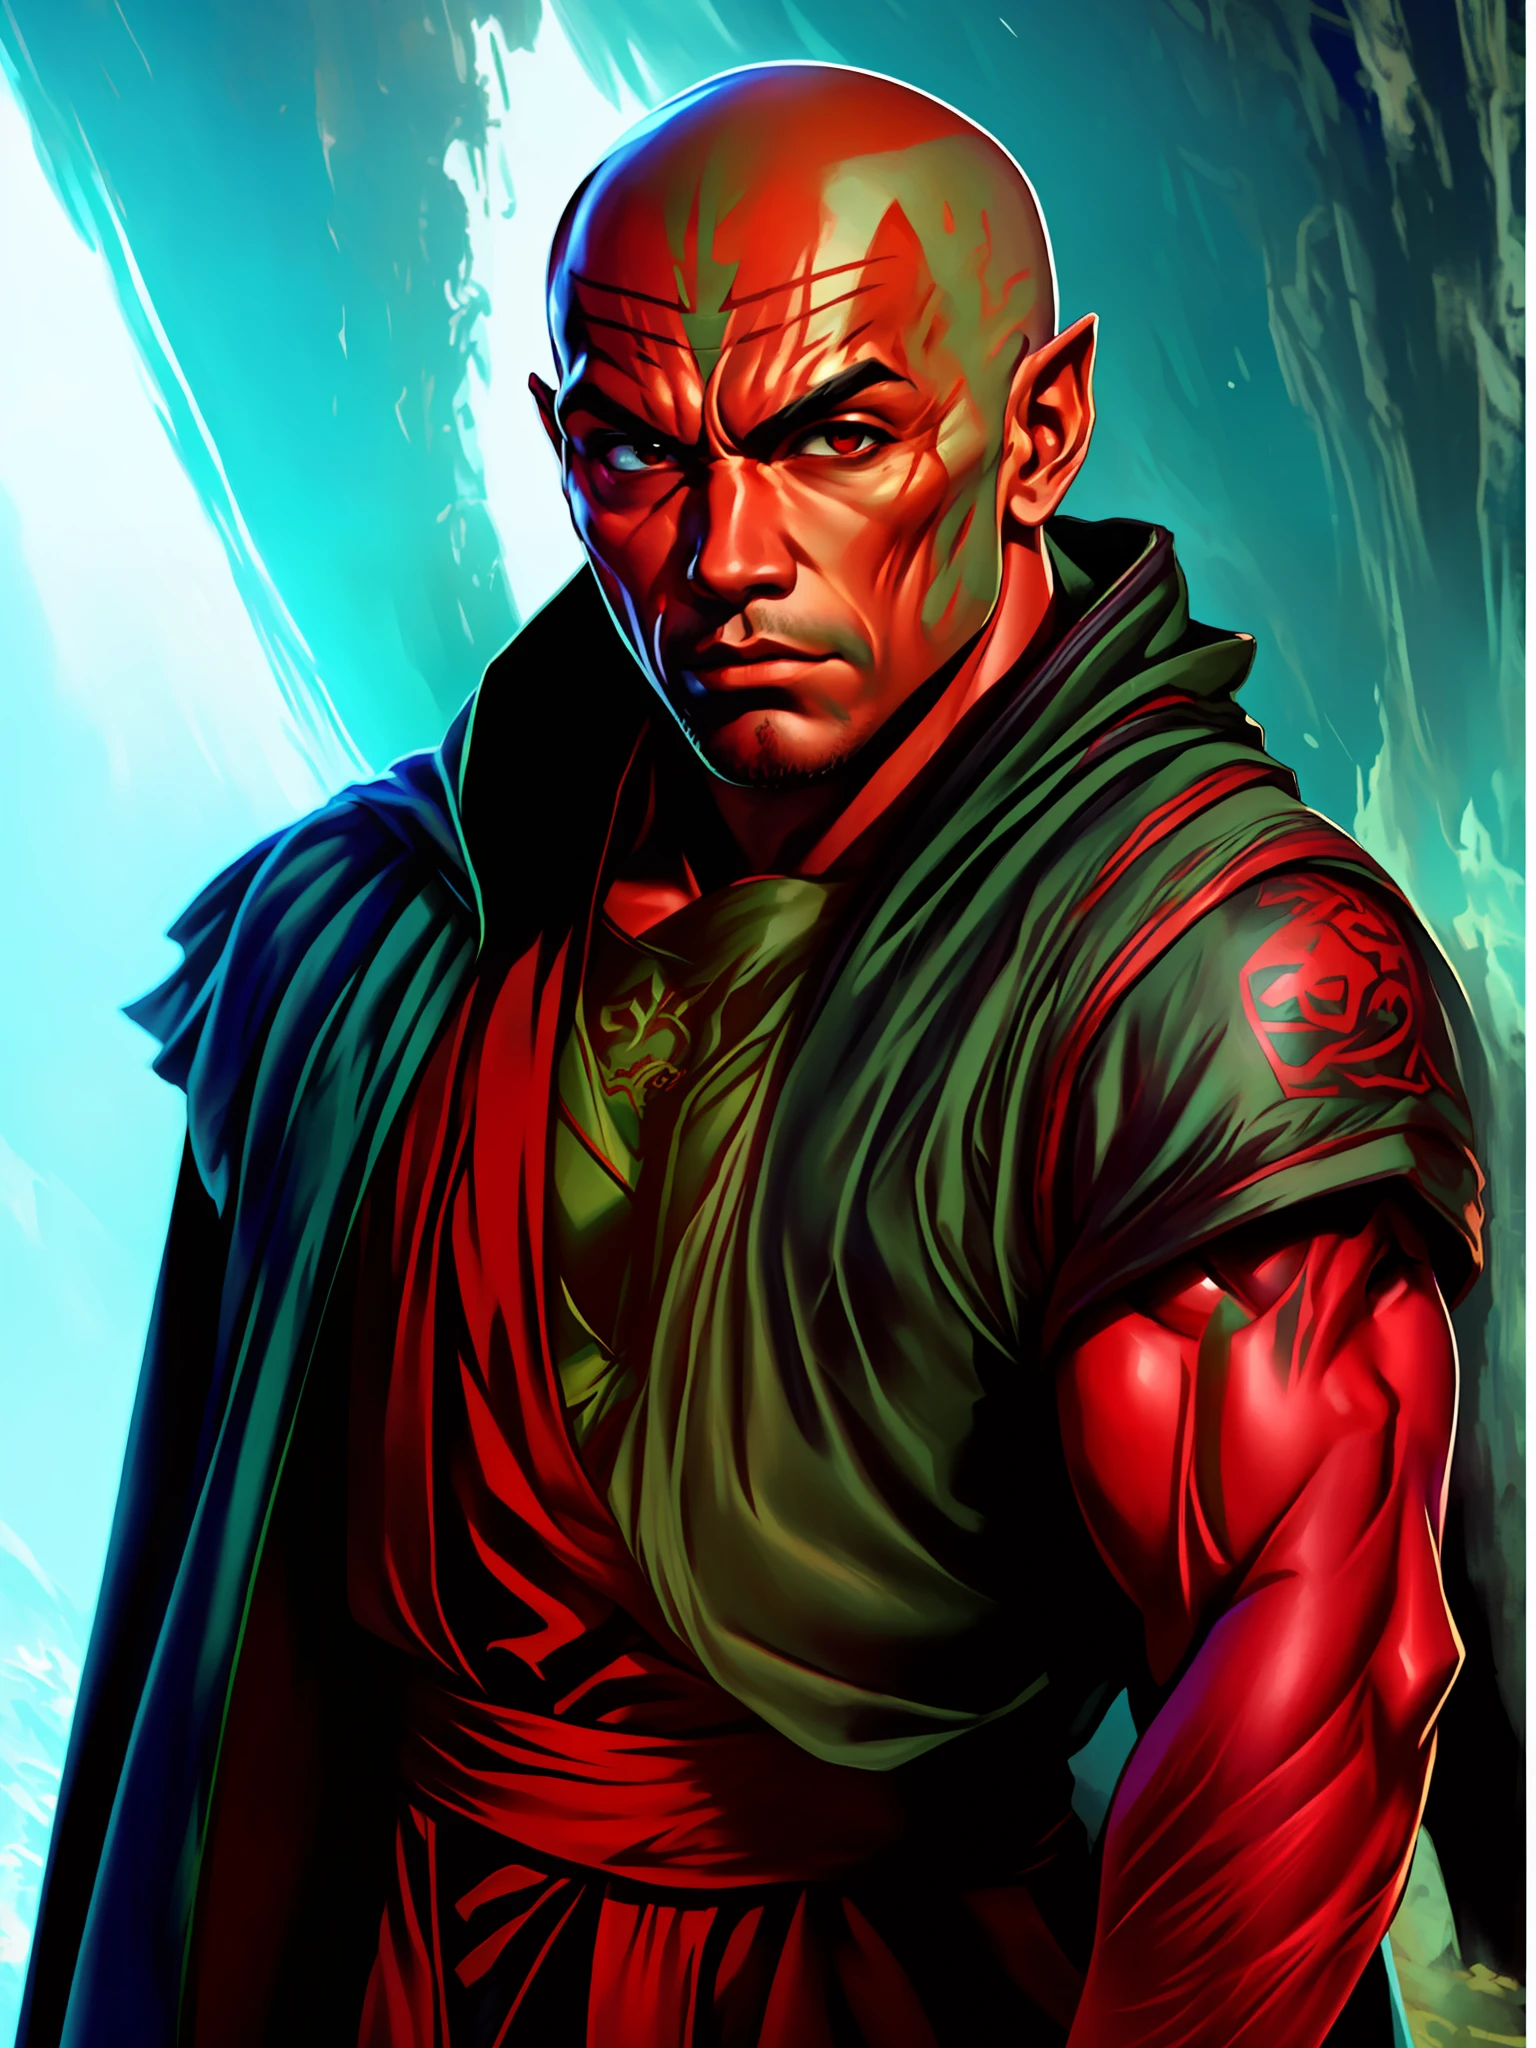 Masterpiece, Best Quality, Realistic Details, High Resolution, High Quality, Anime, Anime Style, Solo Male, Hobgoblin, Red Skin, 1man, Handsome Face, Medium Muscles, Human Face, Red Eyes, Bald, Black Robes, Monk, Tall, Chinese Tattoos